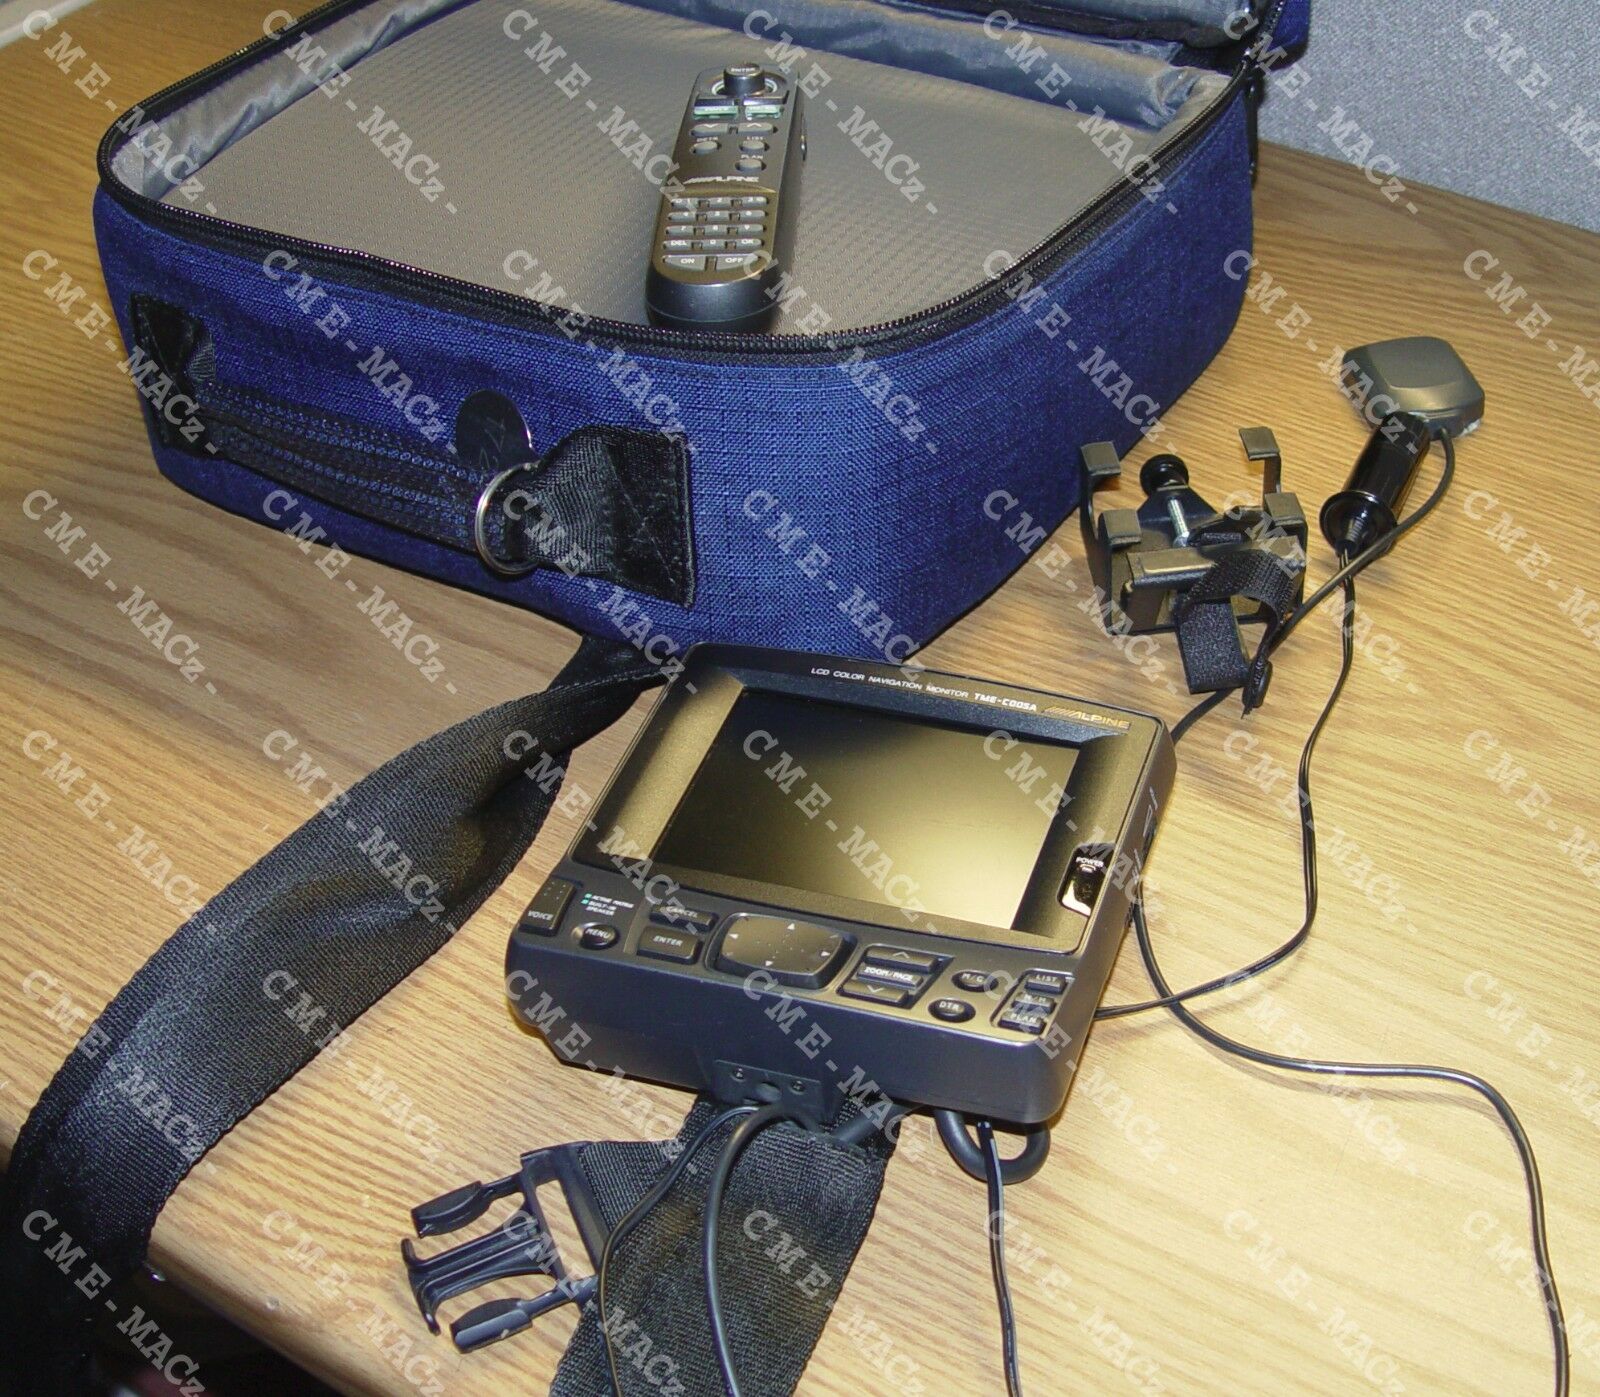 💎alpine Navigation System "in A Bag"⭐models Nve-n851 & Tme-c005a📲very Rare🚘👓